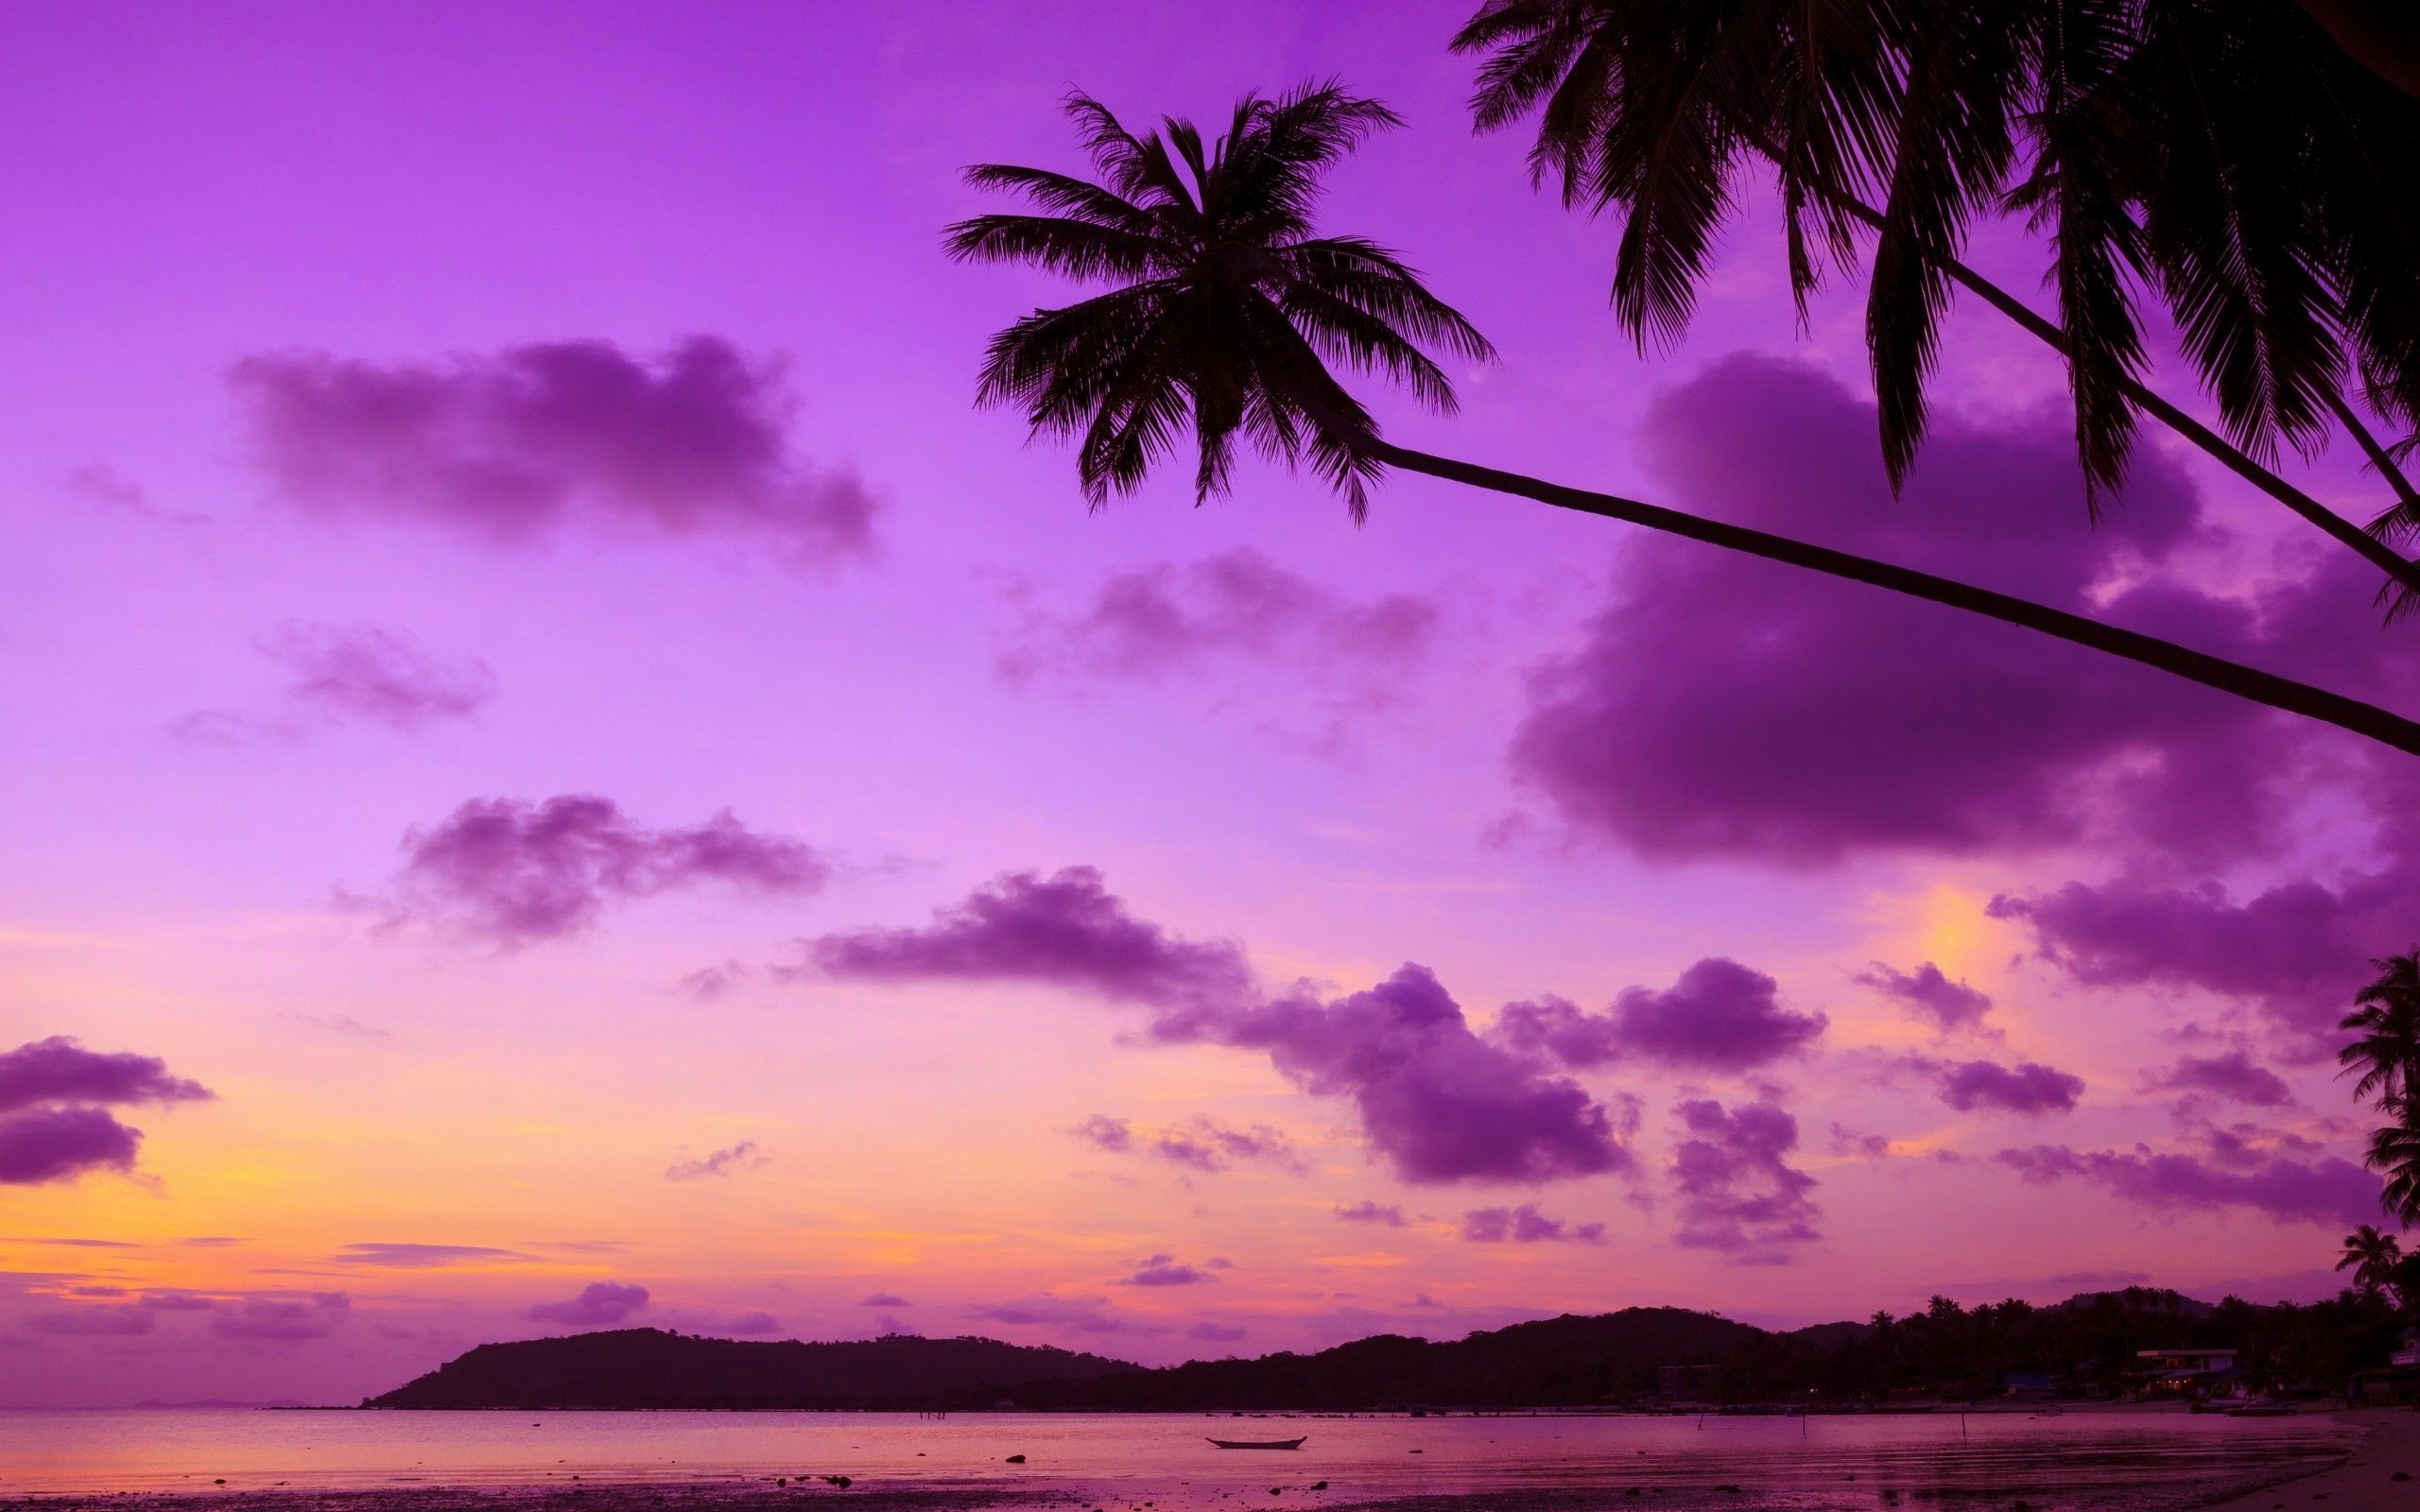 A beautiful purple sunset over a beach with palm trees. - Palm tree, 2560x1600